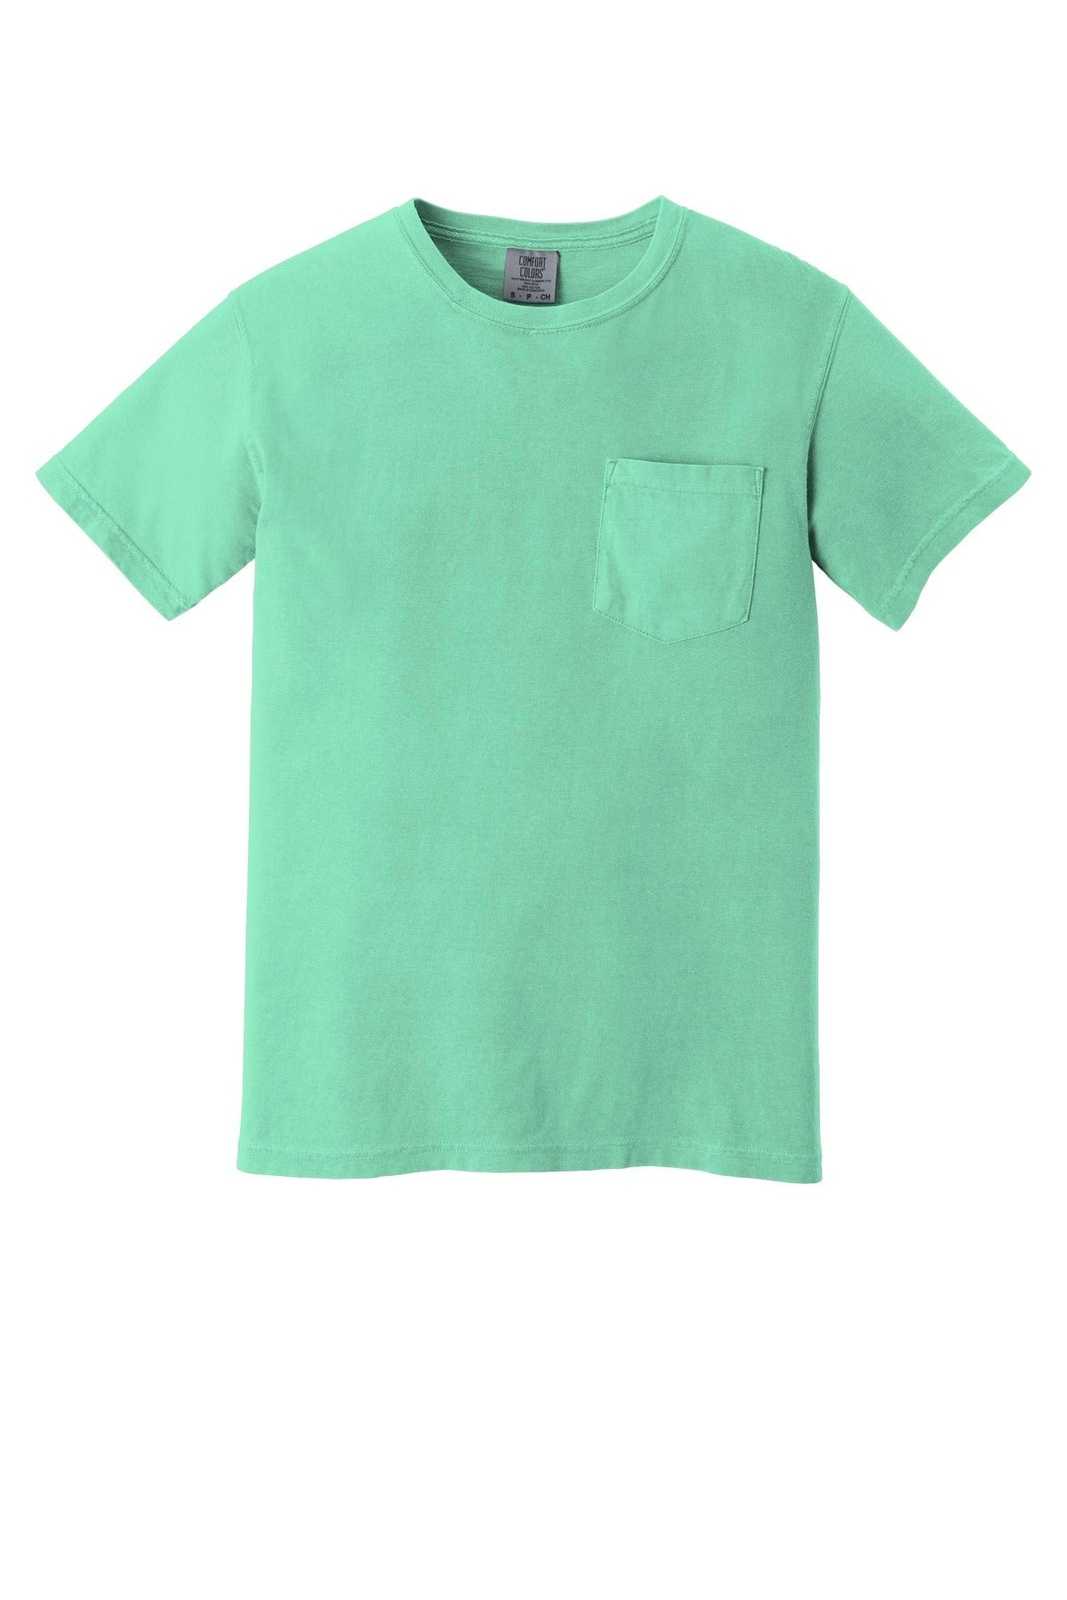 Comfort Colors 6030 Heavyweight Ring Spun Pocket Tee - Island Reef - HIT a Double